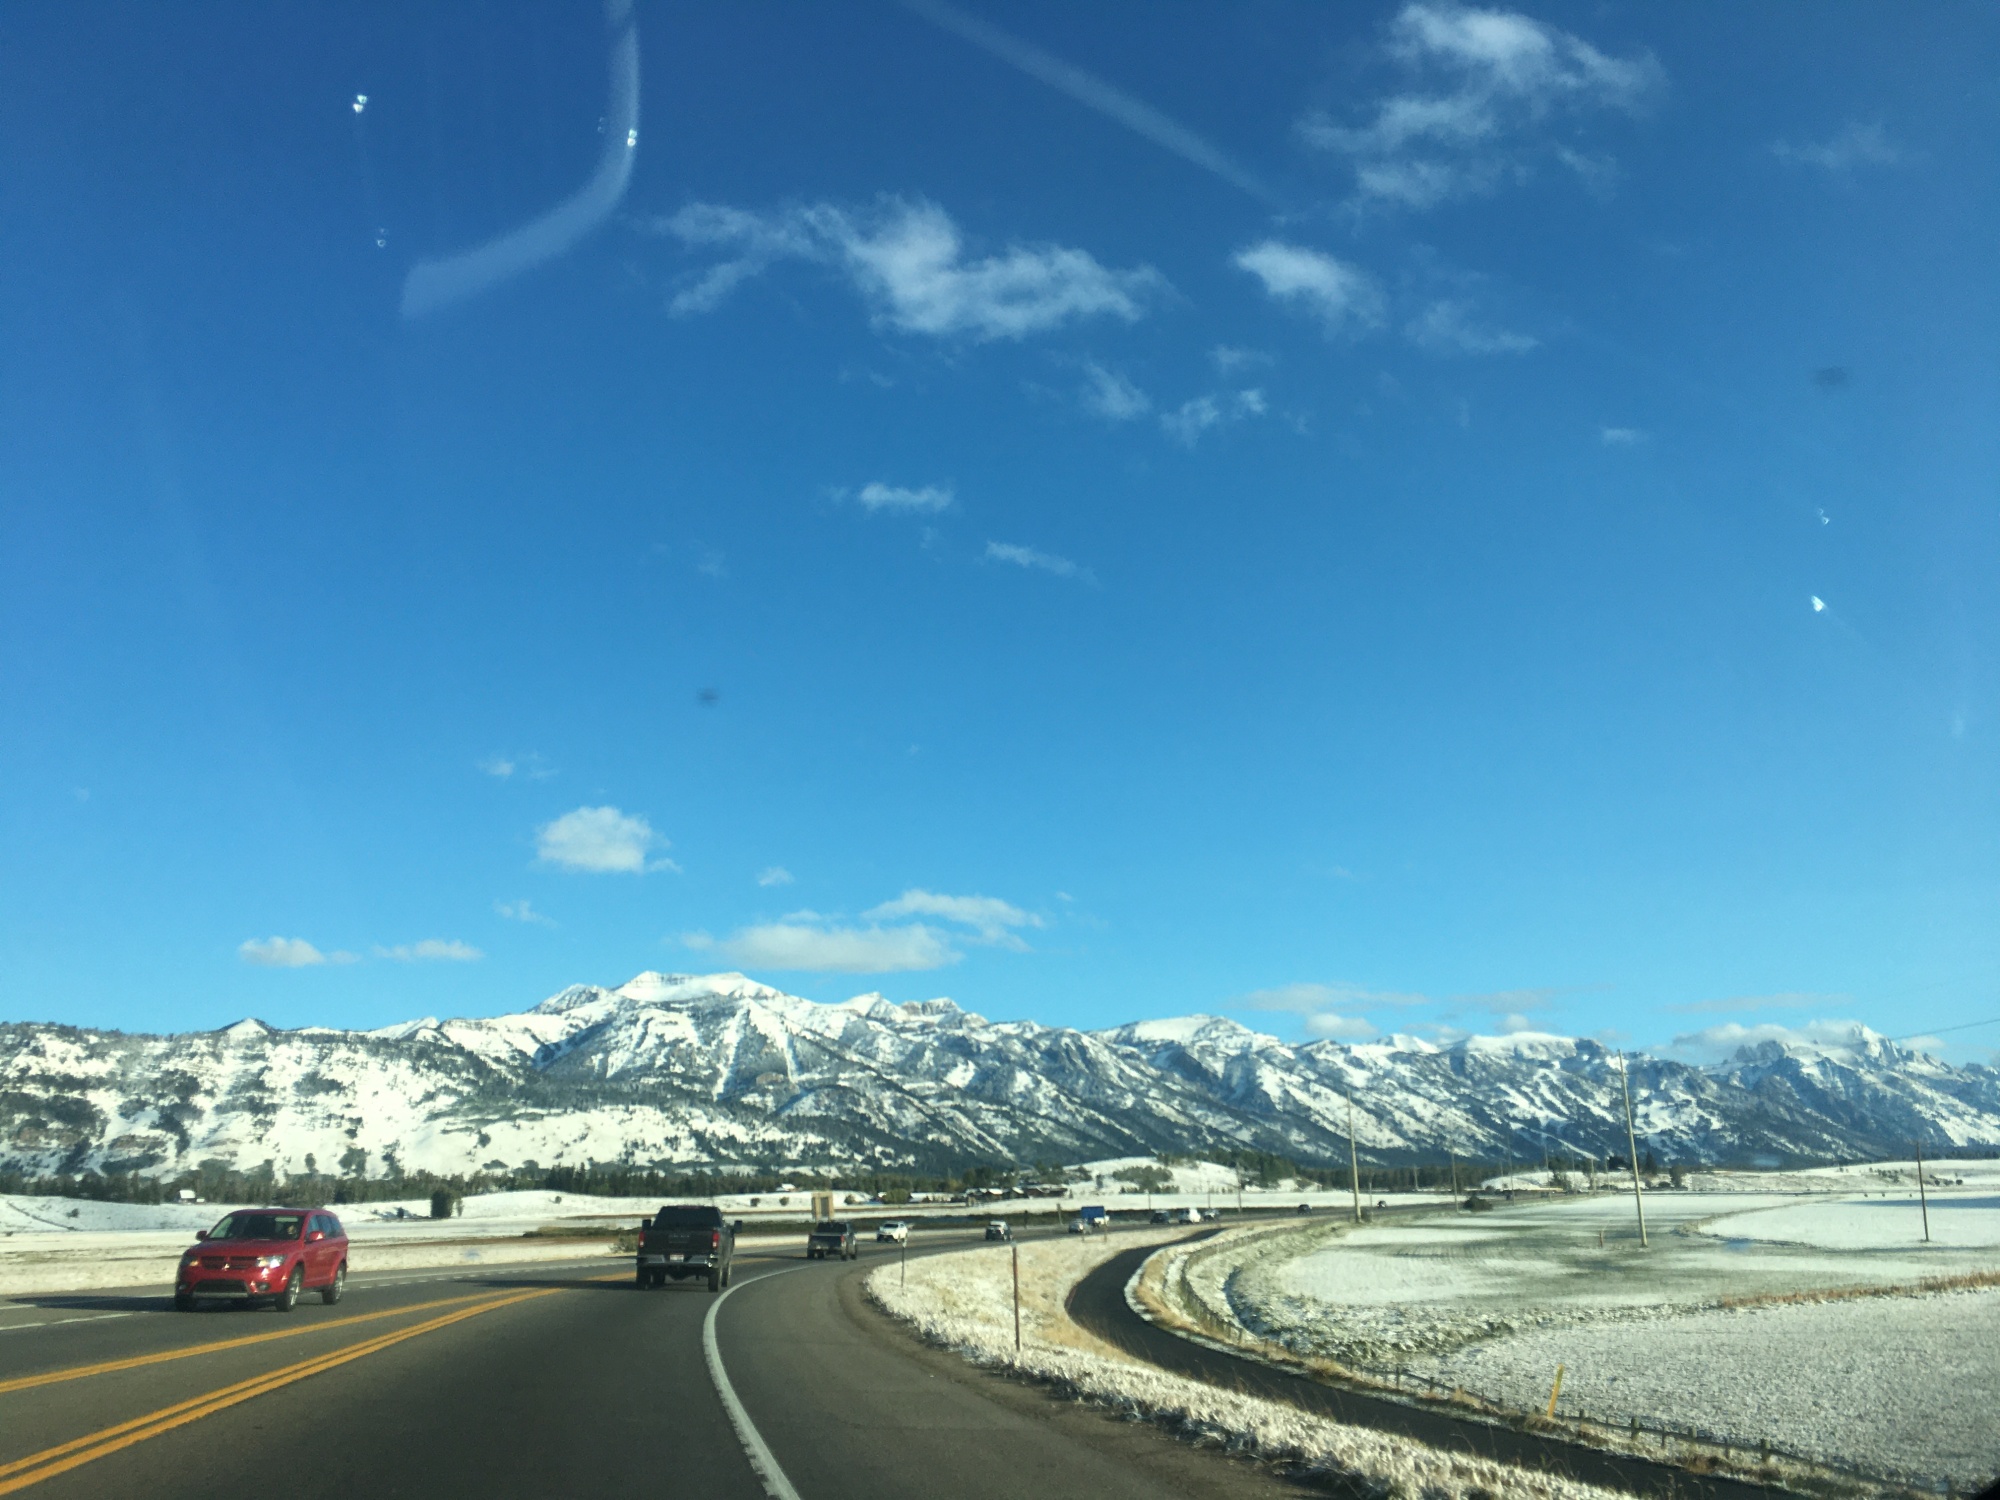 The Grand Teton mountains from the highway